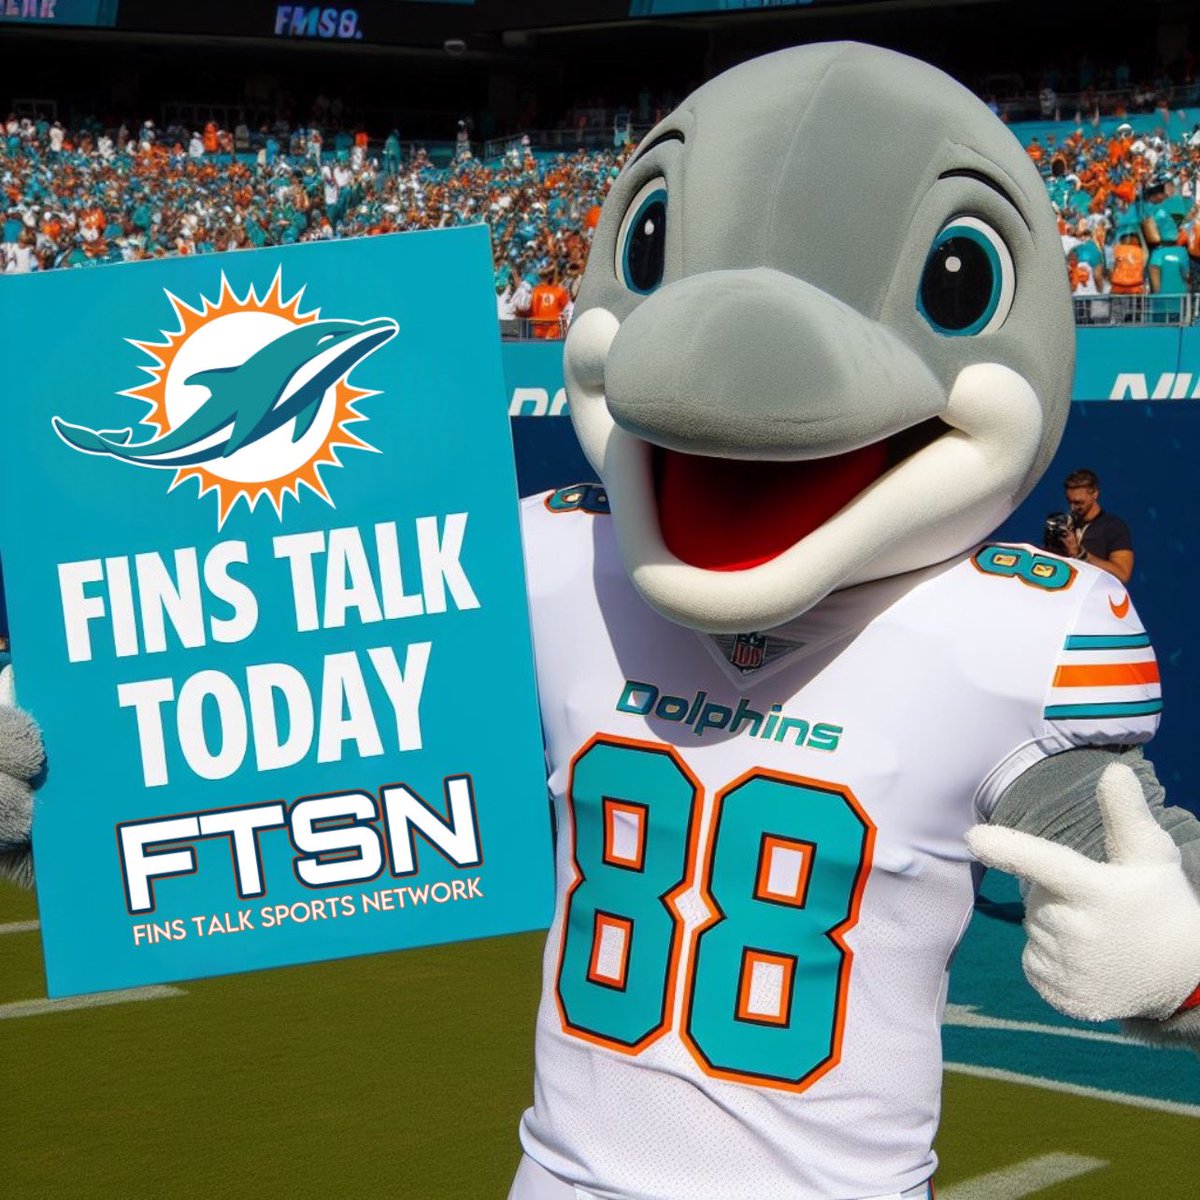 Good morning & #FinsUp #MiamiDolphins fans! Start your weekend off right with a brand new episode of Fins Talk Today with @BobbyFinsTalk & @Phins2winn at 12pm EST! • #Dolphins News & Rumors • #NFLDraft Talk Watch live here: youtube.com/live/Orw687acl… #FinsUp #DolphinsTwitter